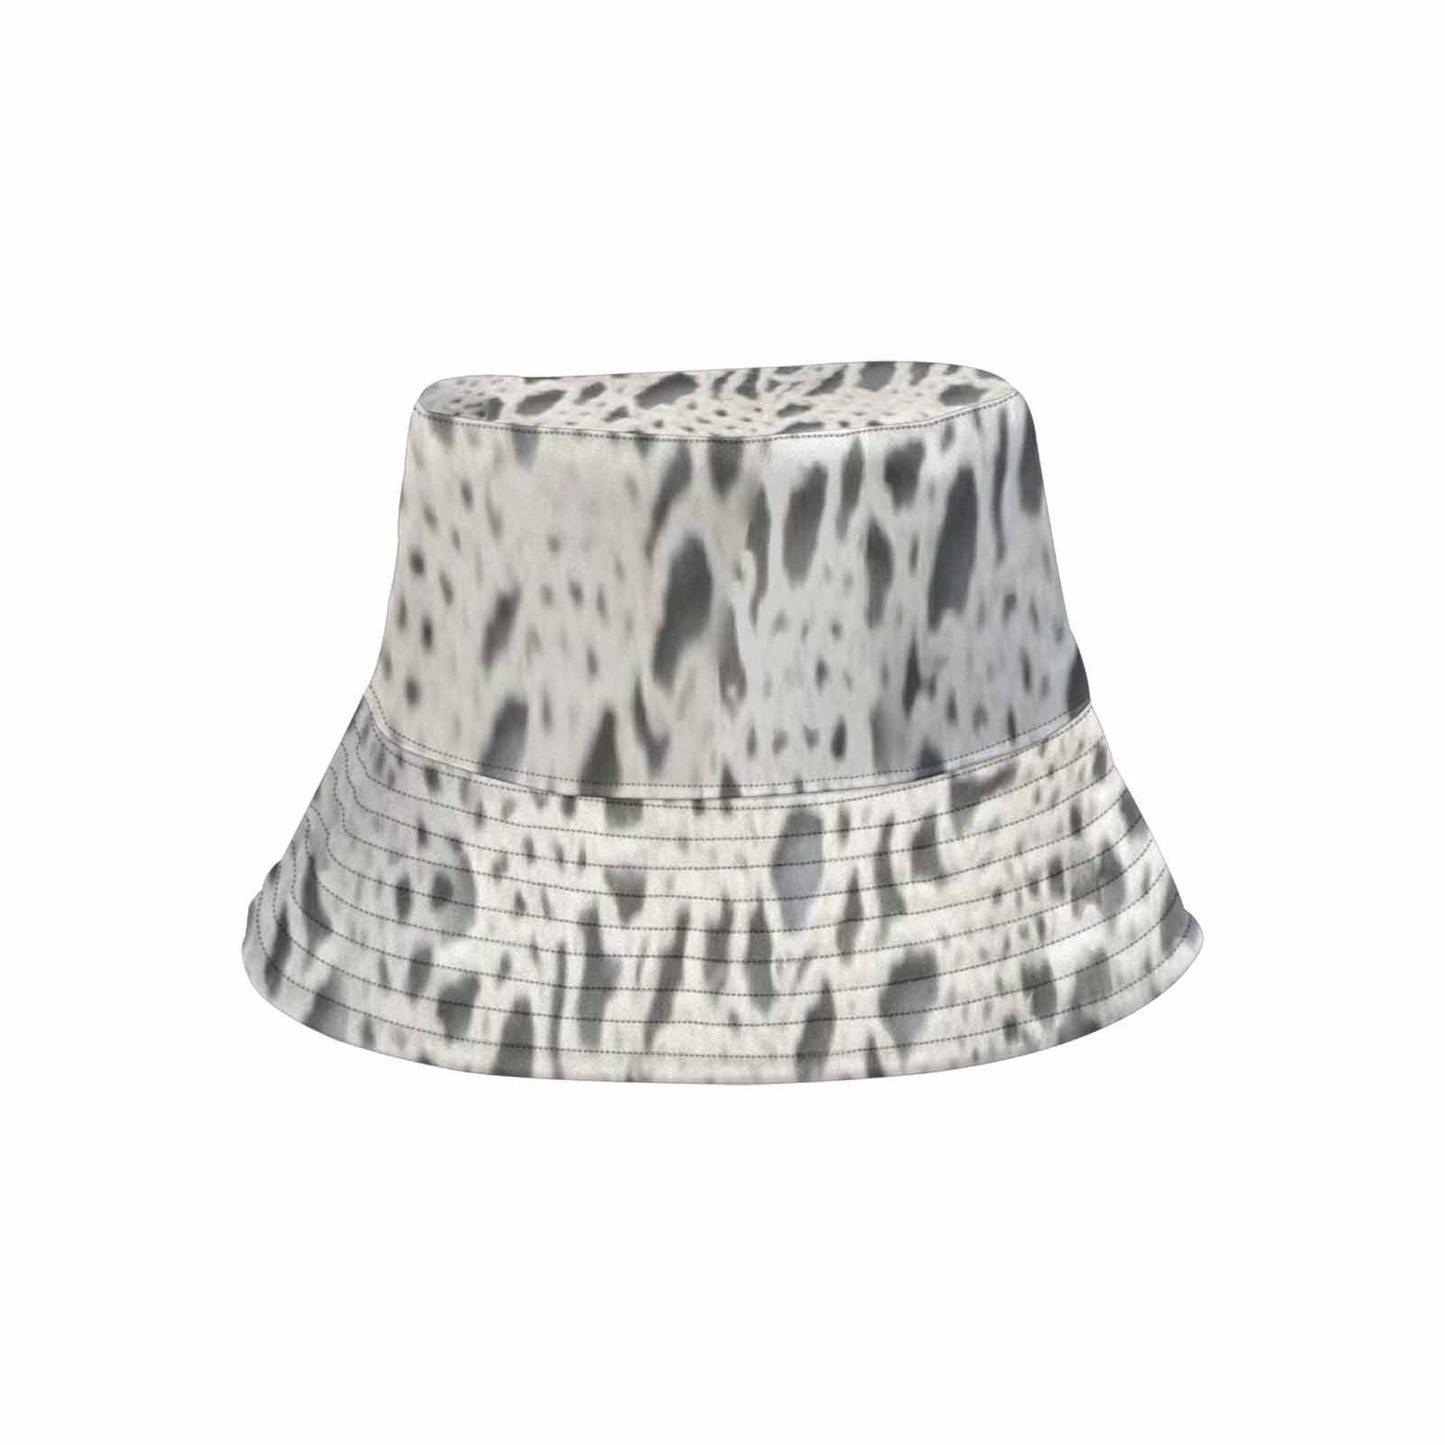 Victorian lace Bucket Hat, outdoors hat, design 12